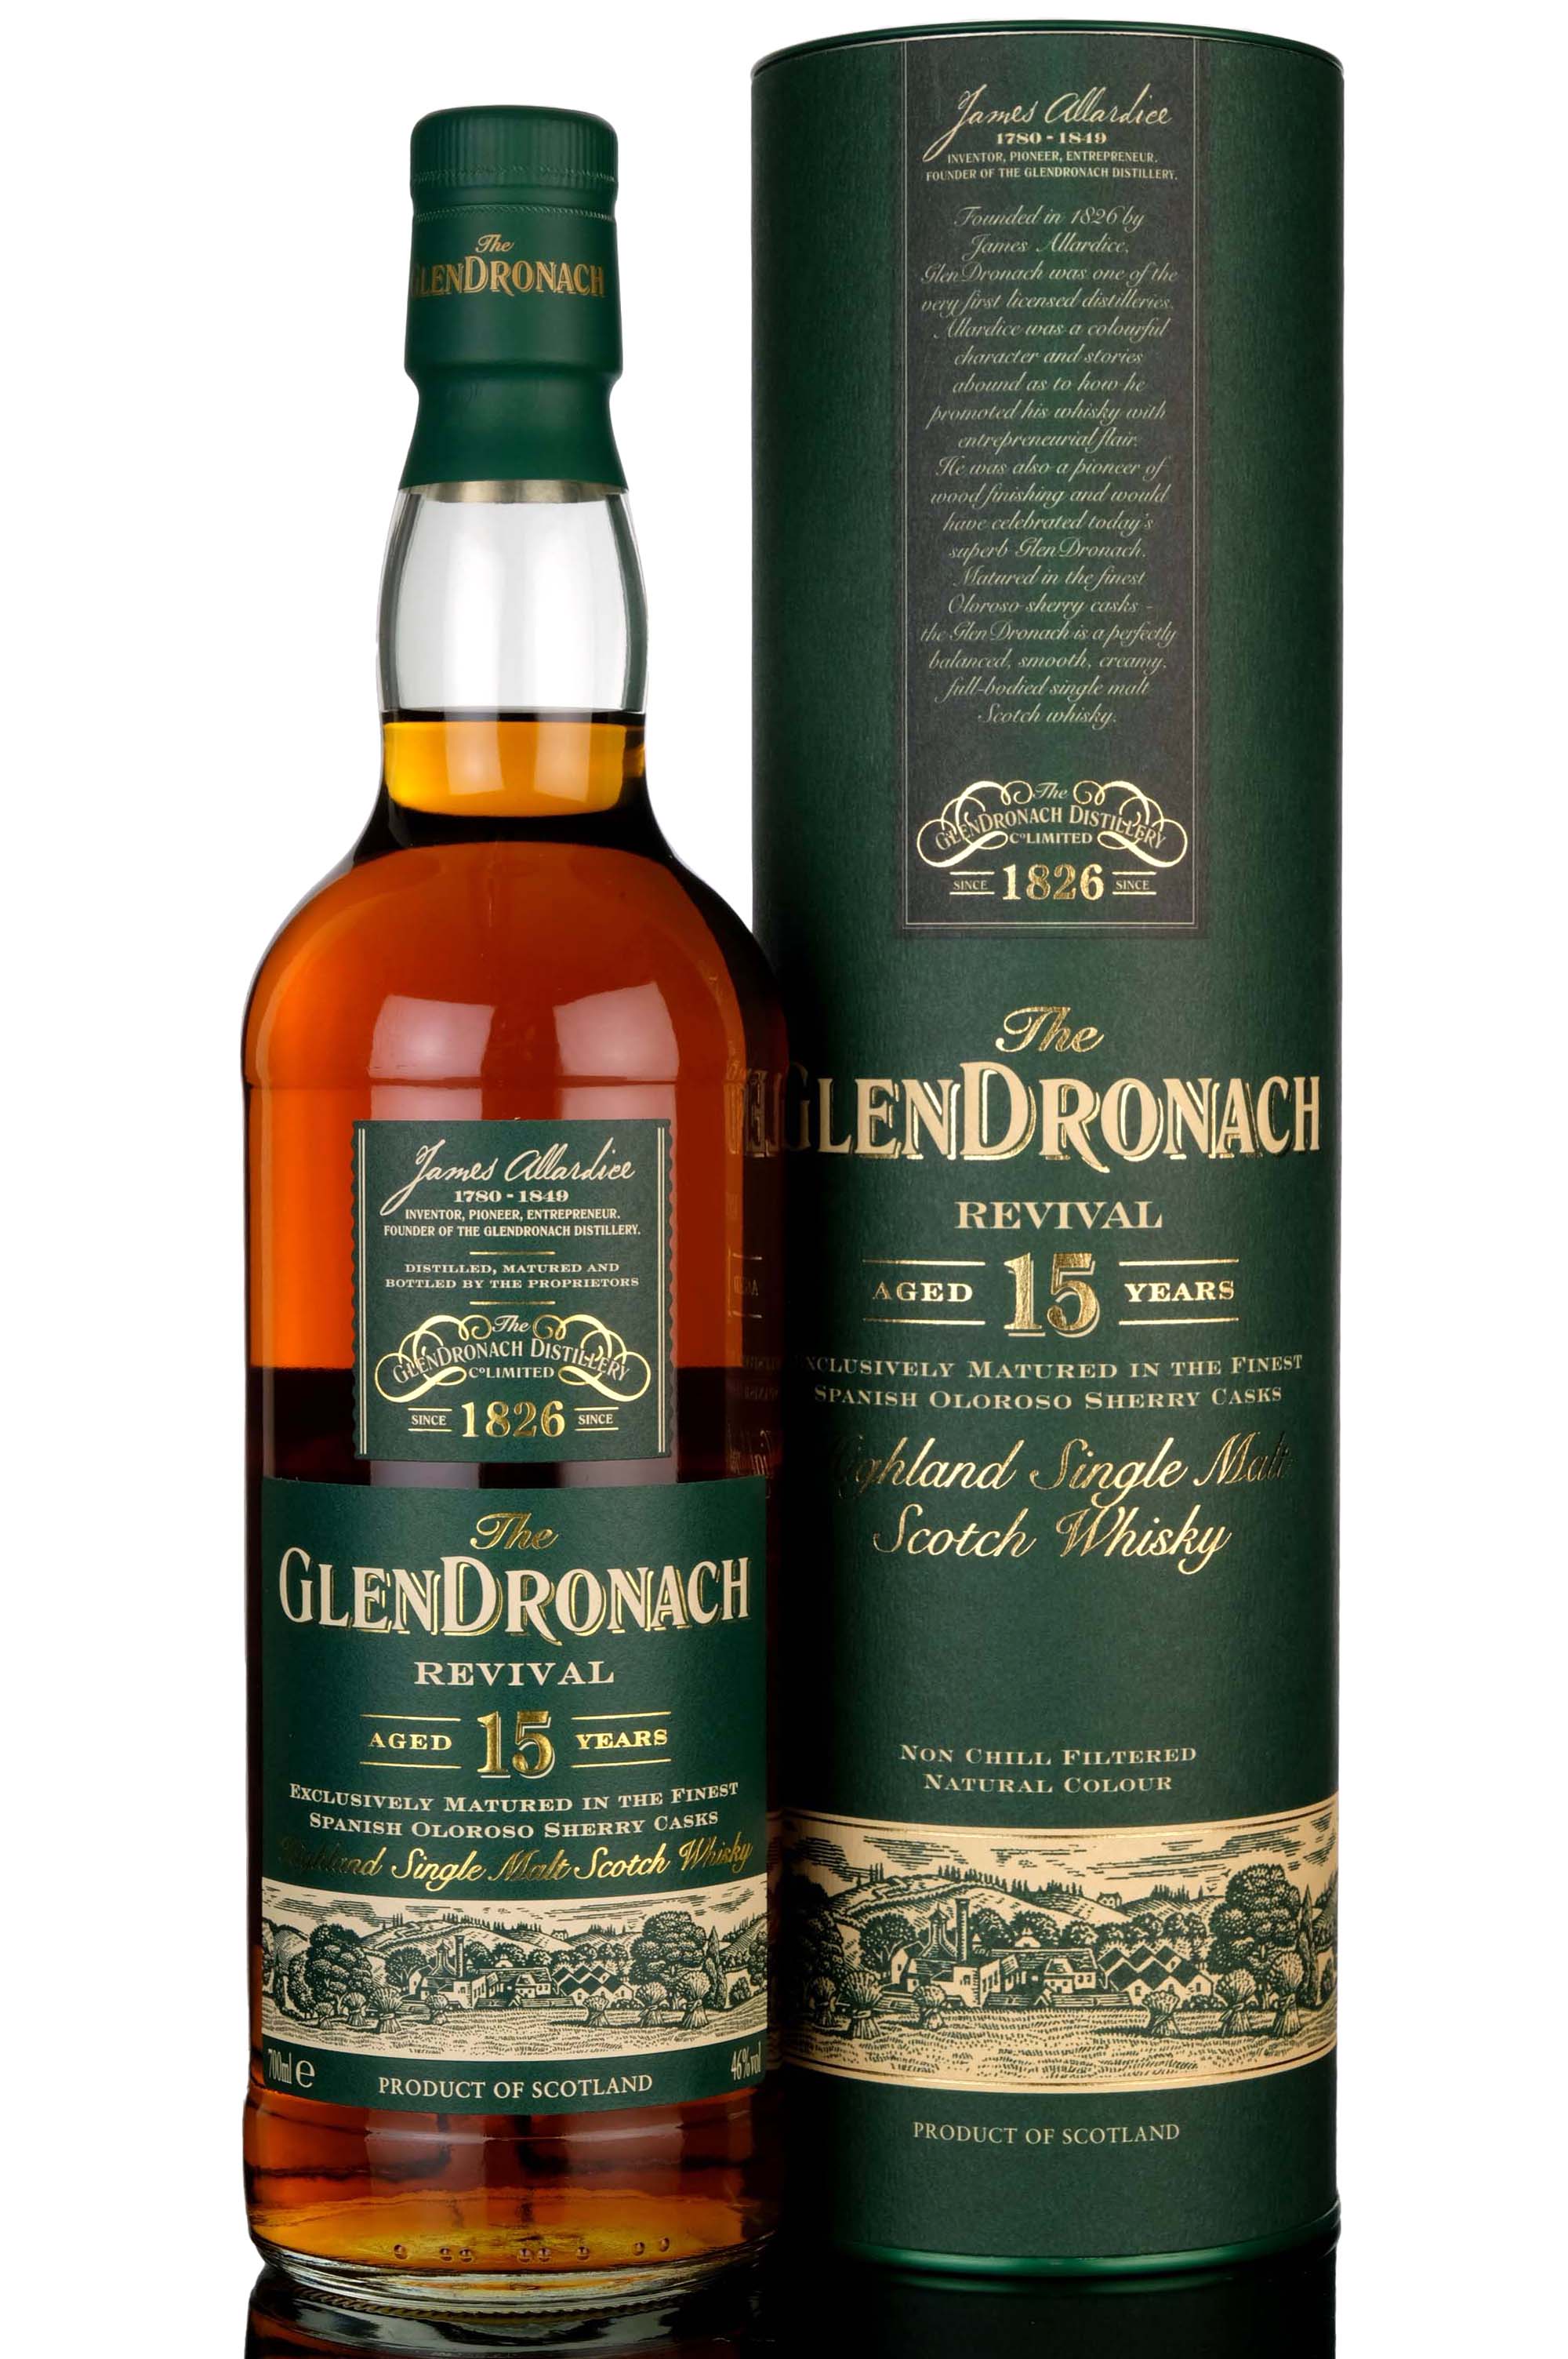 Glendronach 15 Year Old - Revival - 2015 Release